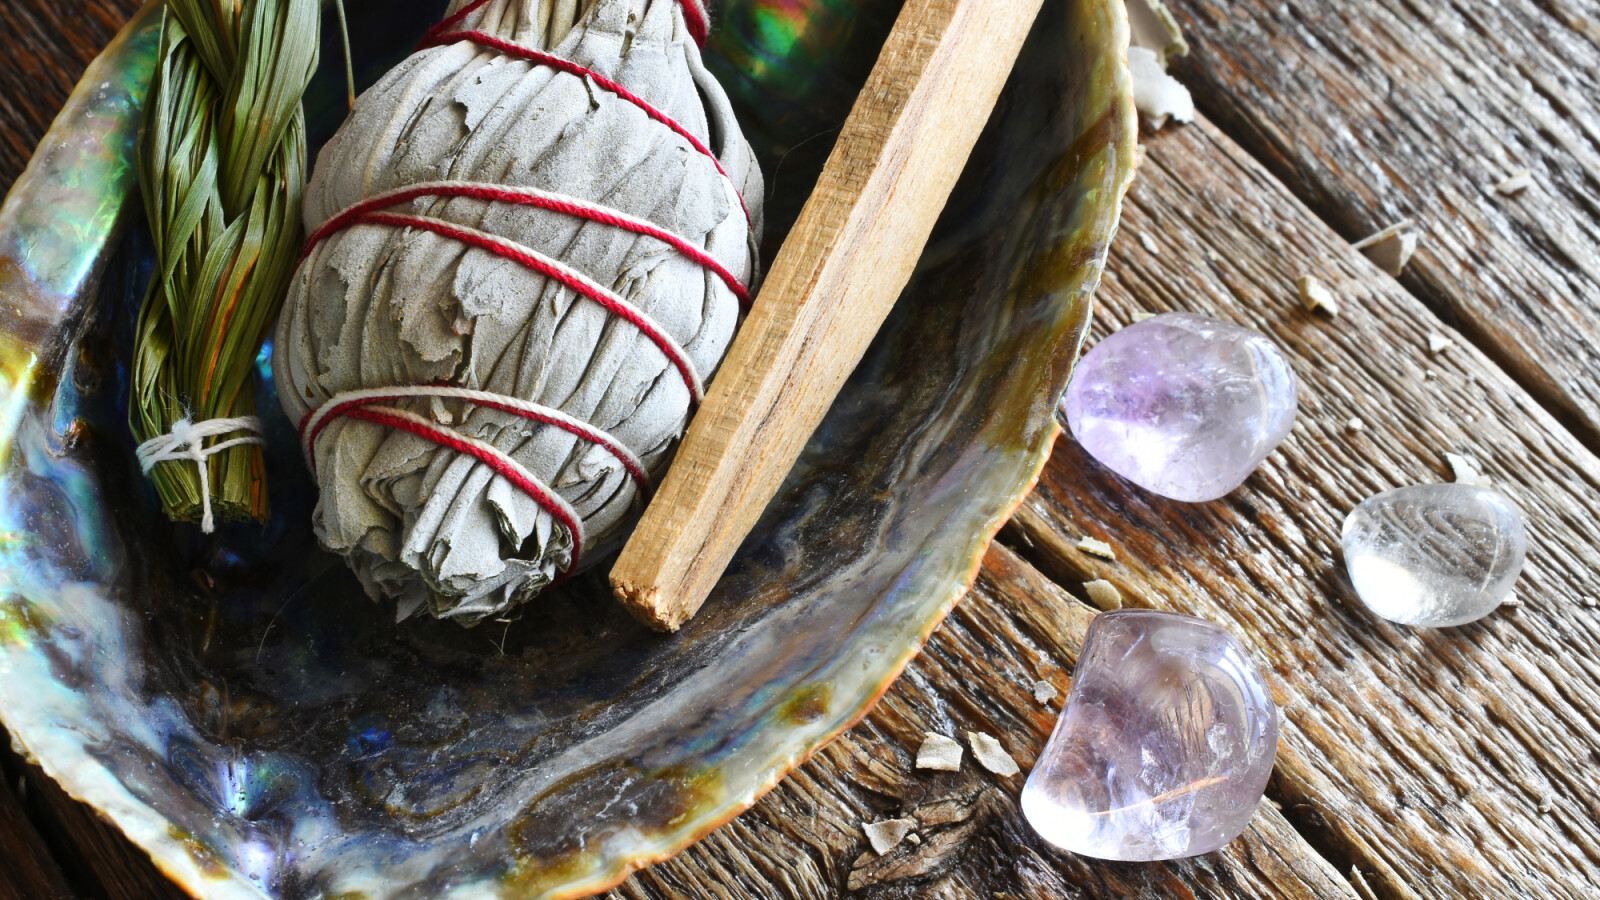 SMUDGING: HERE ARE MY 3 FAVORITES